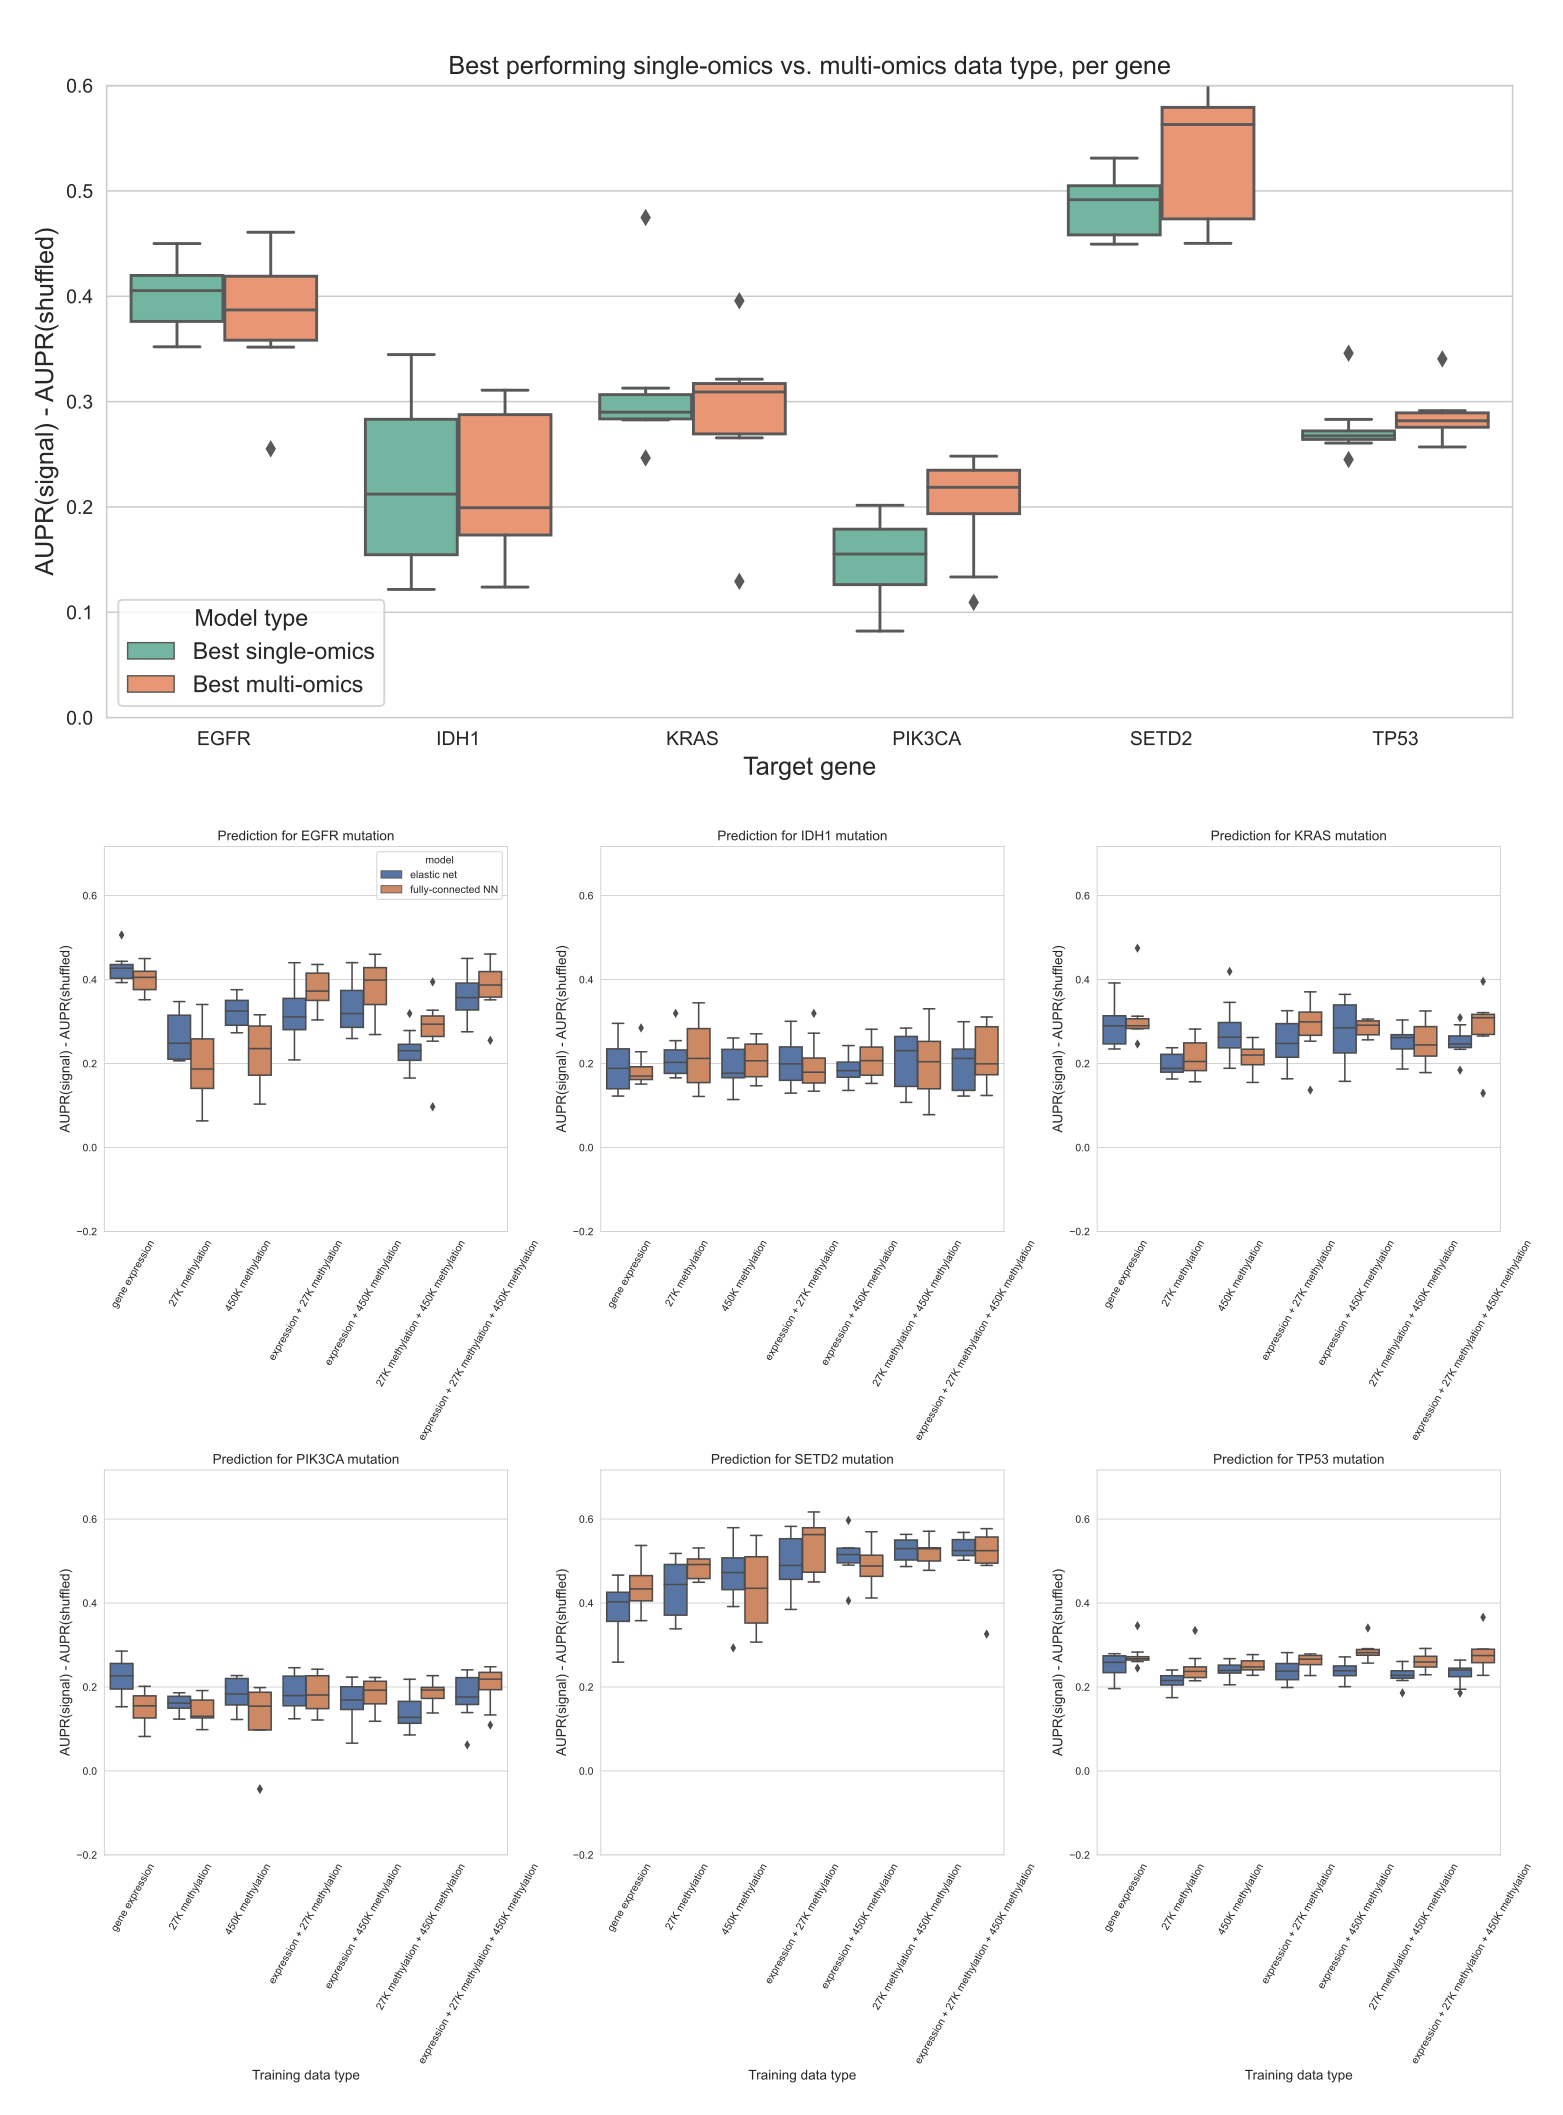 Figure S7: Top plot: comparing the best-performing model (i.e. highest mean AUPR relative to permuted baseline) trained on a single data type against the best “multi-omics” model for each target gene, using a 3-layer fully-connected neural network. The top 5,000 principal components were used as predictive features for each data type. The difference between single-omics and multi-omics performance for PIK3CA (p = 0.0156, in favor of multi-omics) and TP53 (p = 0.0391, in favor of single-omics) were statistically significant, but other differences between single-omics and multi-omics models were not statistically significant using paired-sample Wilcoxon tests across cross-validation folds, for a threshold of 0.05. Bottom plots: comparison of classifier performance between elastic net and fully-connected NN, relative to baseline with permuted labels, for individual genes. Each panel shows performance for one of the six target genes; box plots show performance distribution over 8 evaluation sets (4 cross-validation folds x 2 replicates).